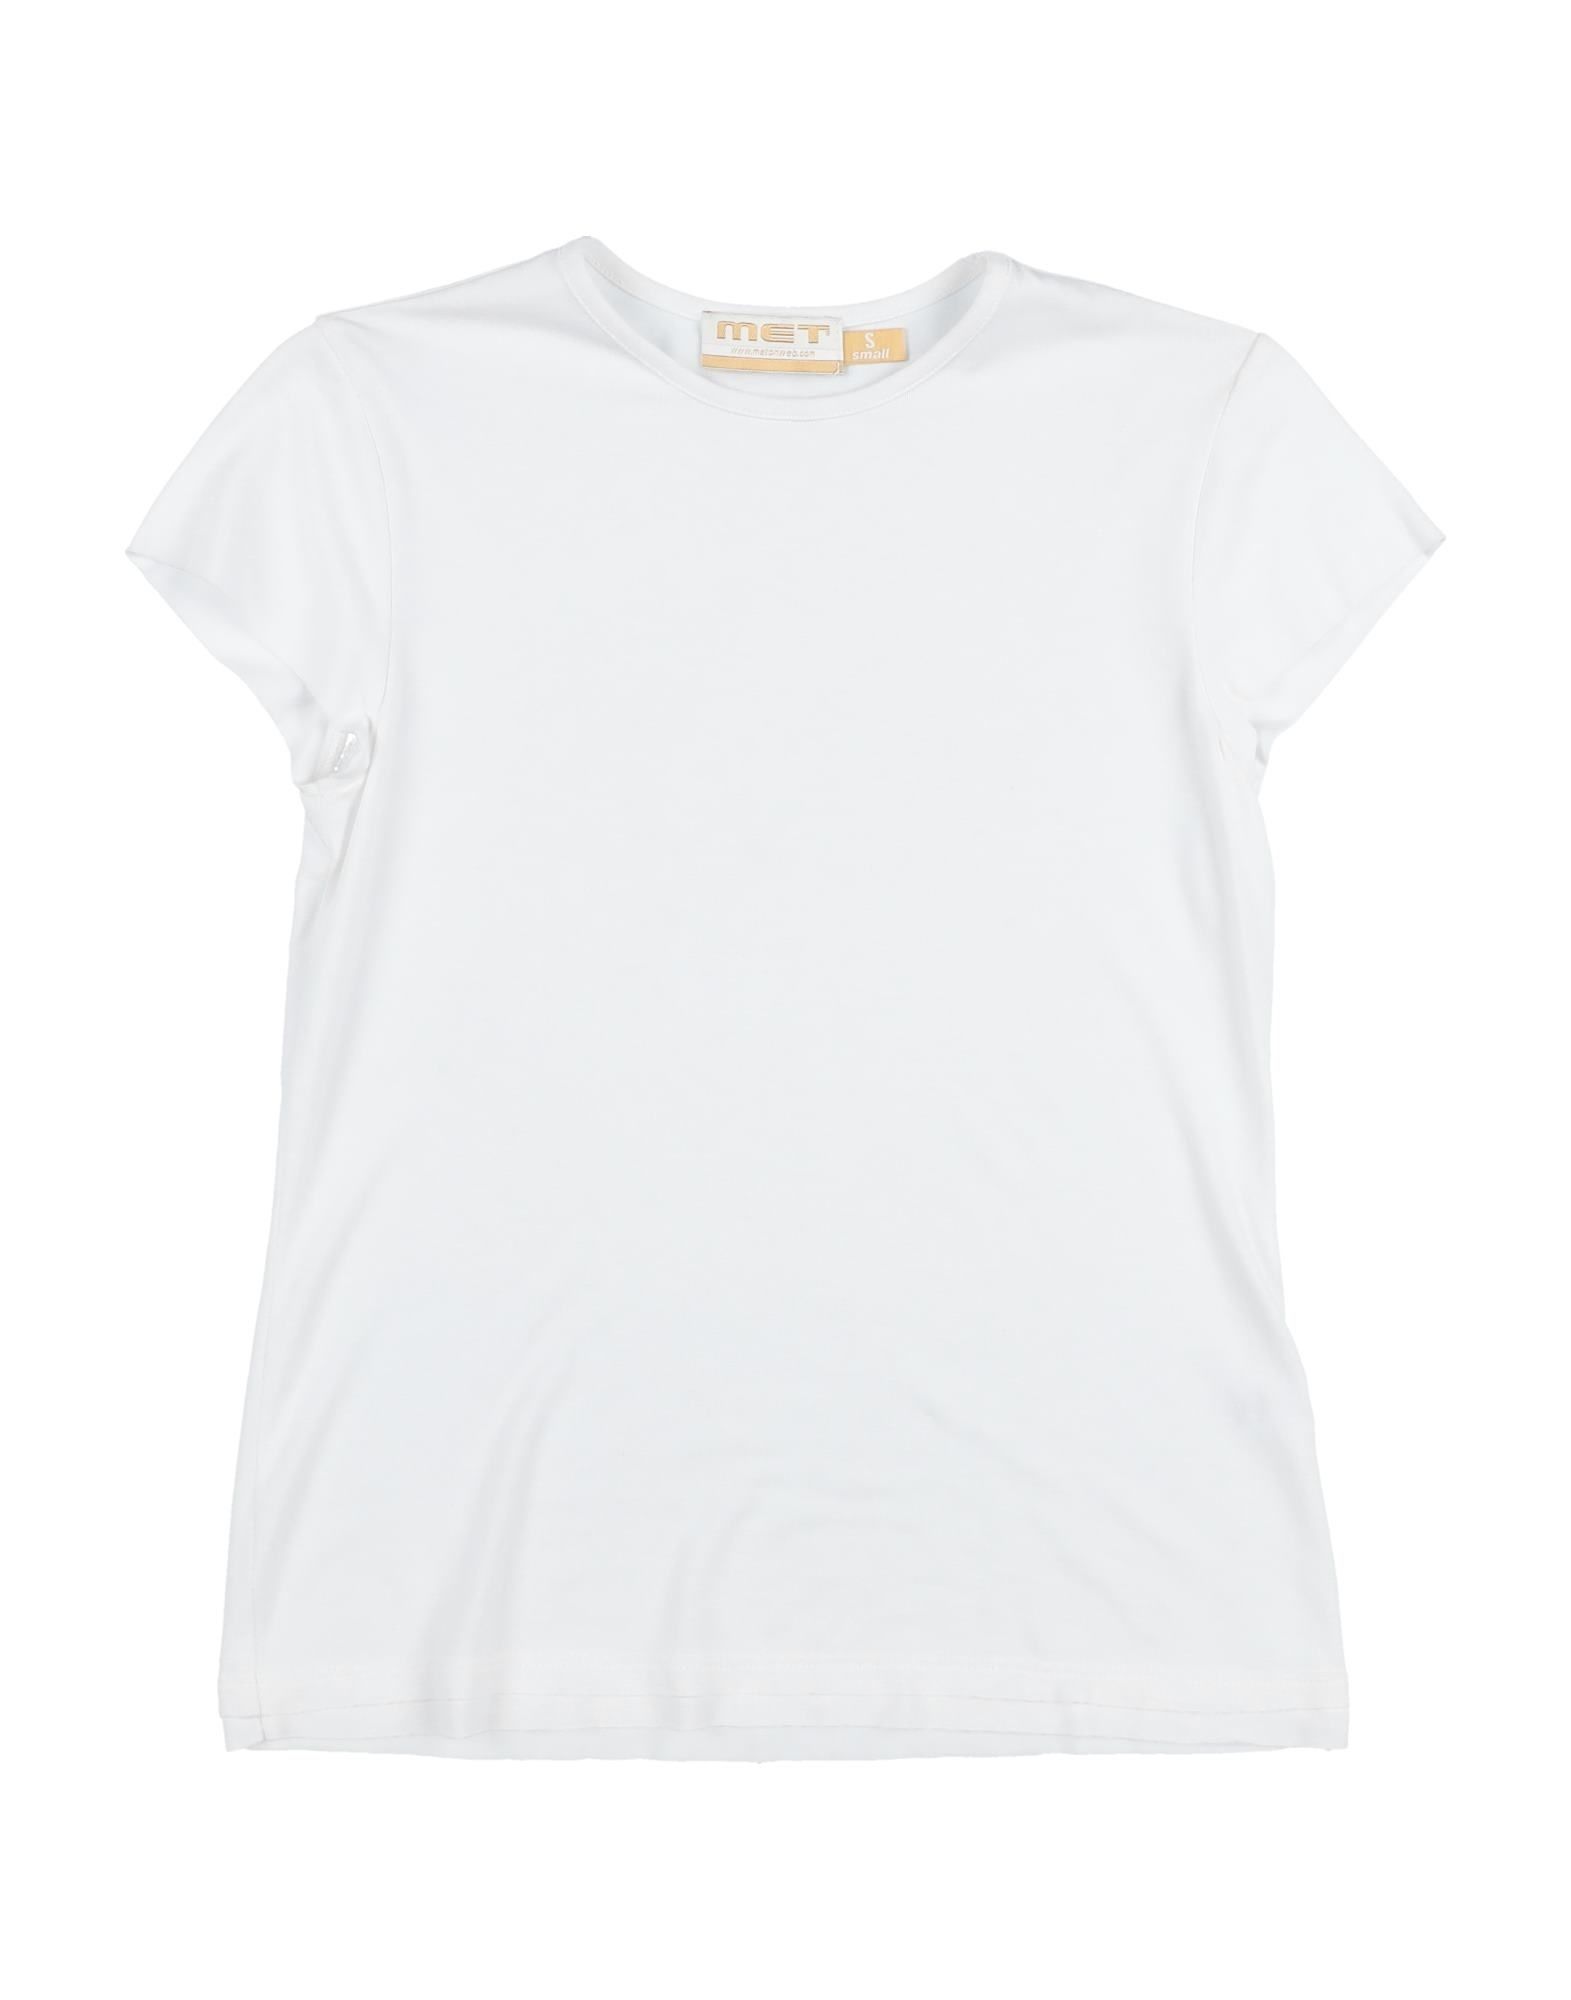 Met Jeans Kids' T-shirts In White